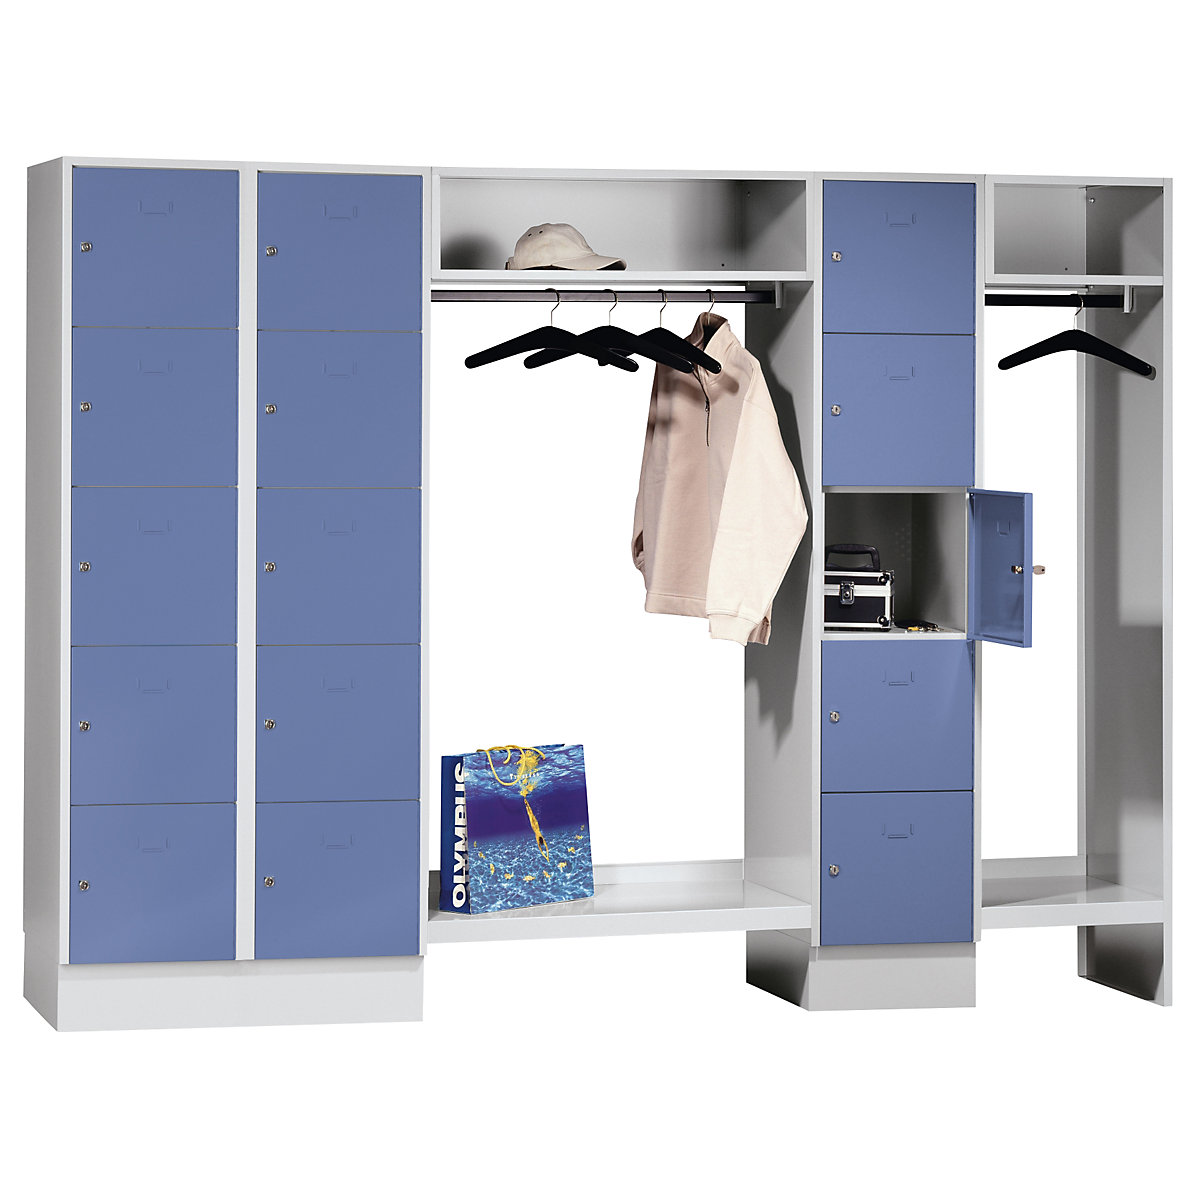 Cloakroom locker system – Wolf, 15 compartments left / centre, 15 coat hangers, overall width 2520 mm, compartment width 398 mm, pigeon blue/light grey-12